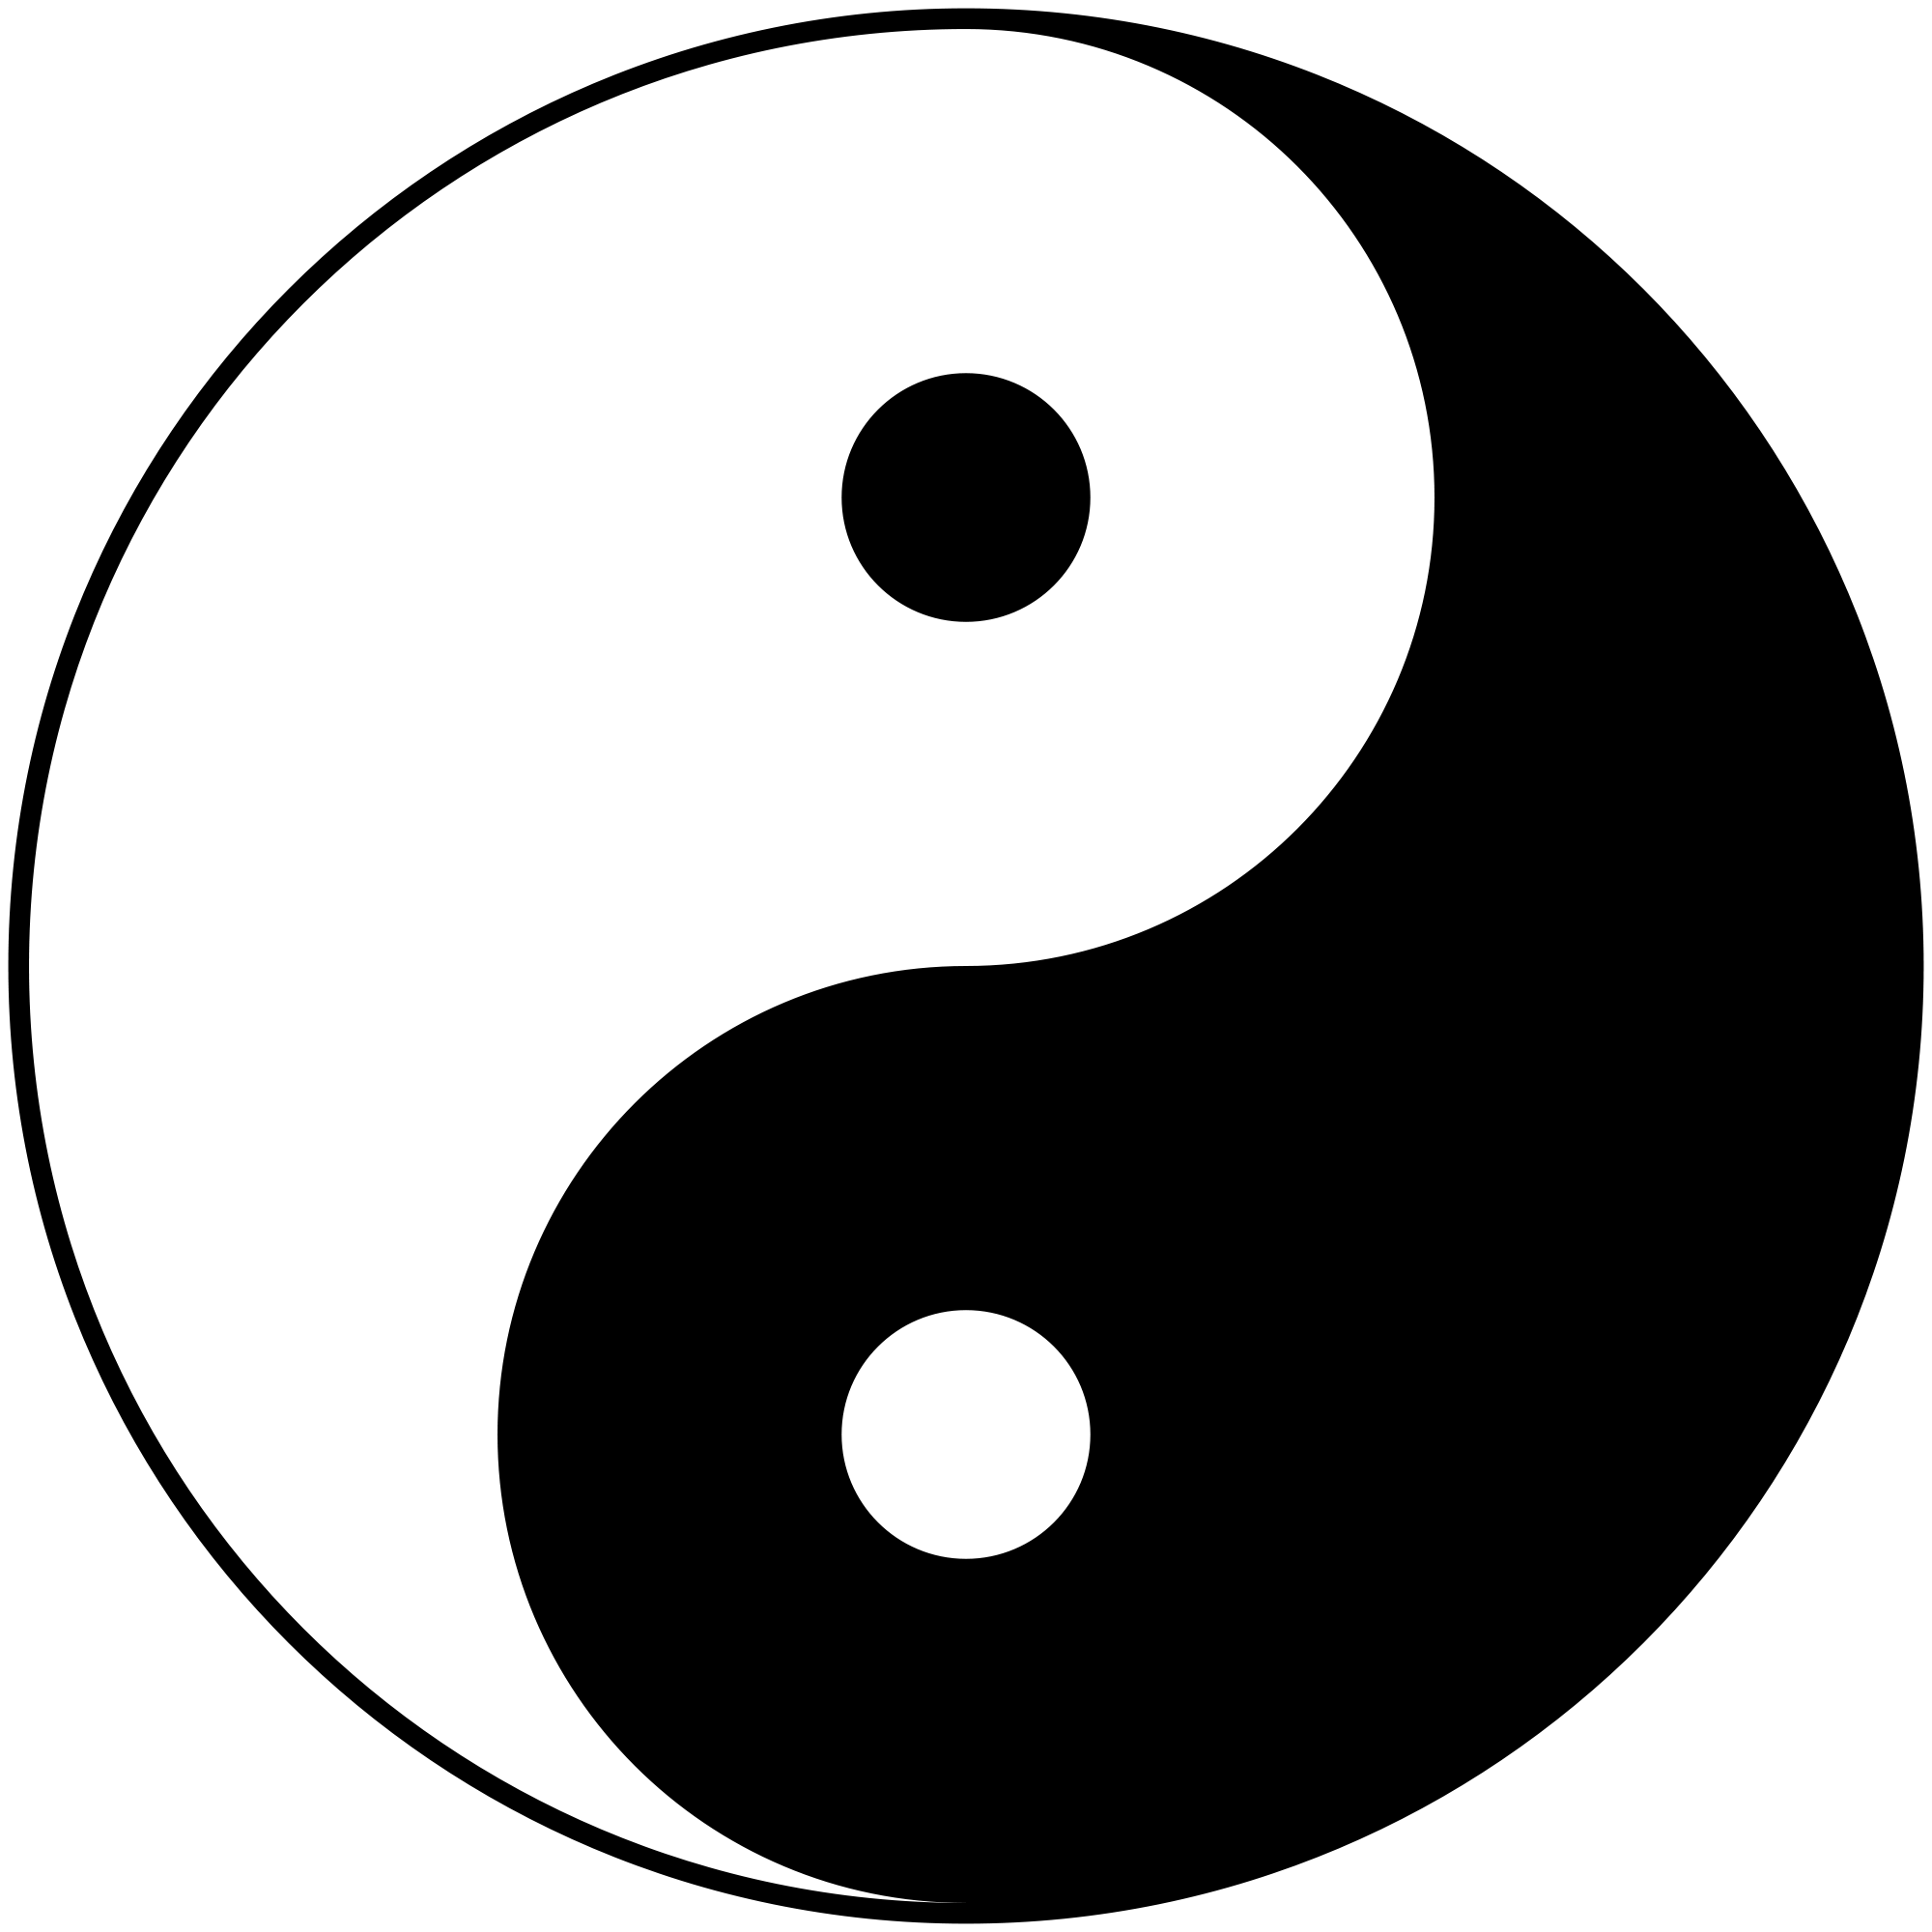 Free Pictures Of Ying Yang Symbol, Download Free Clip Art.